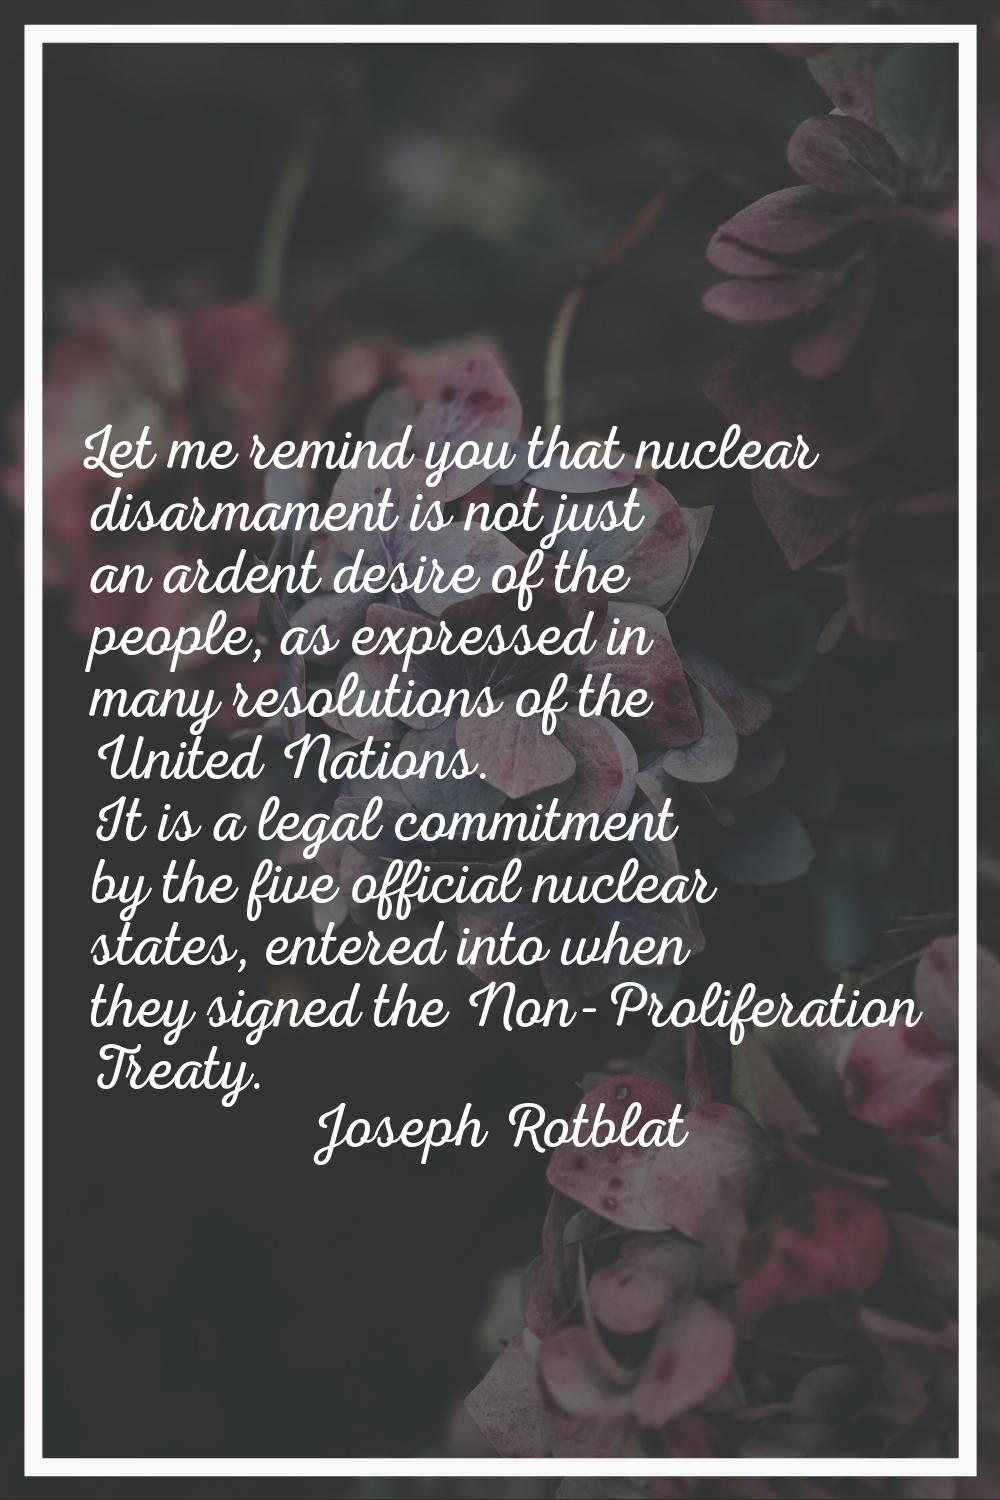 Let me remind you that nuclear disarmament is not just an ardent desire of the people, as expressed